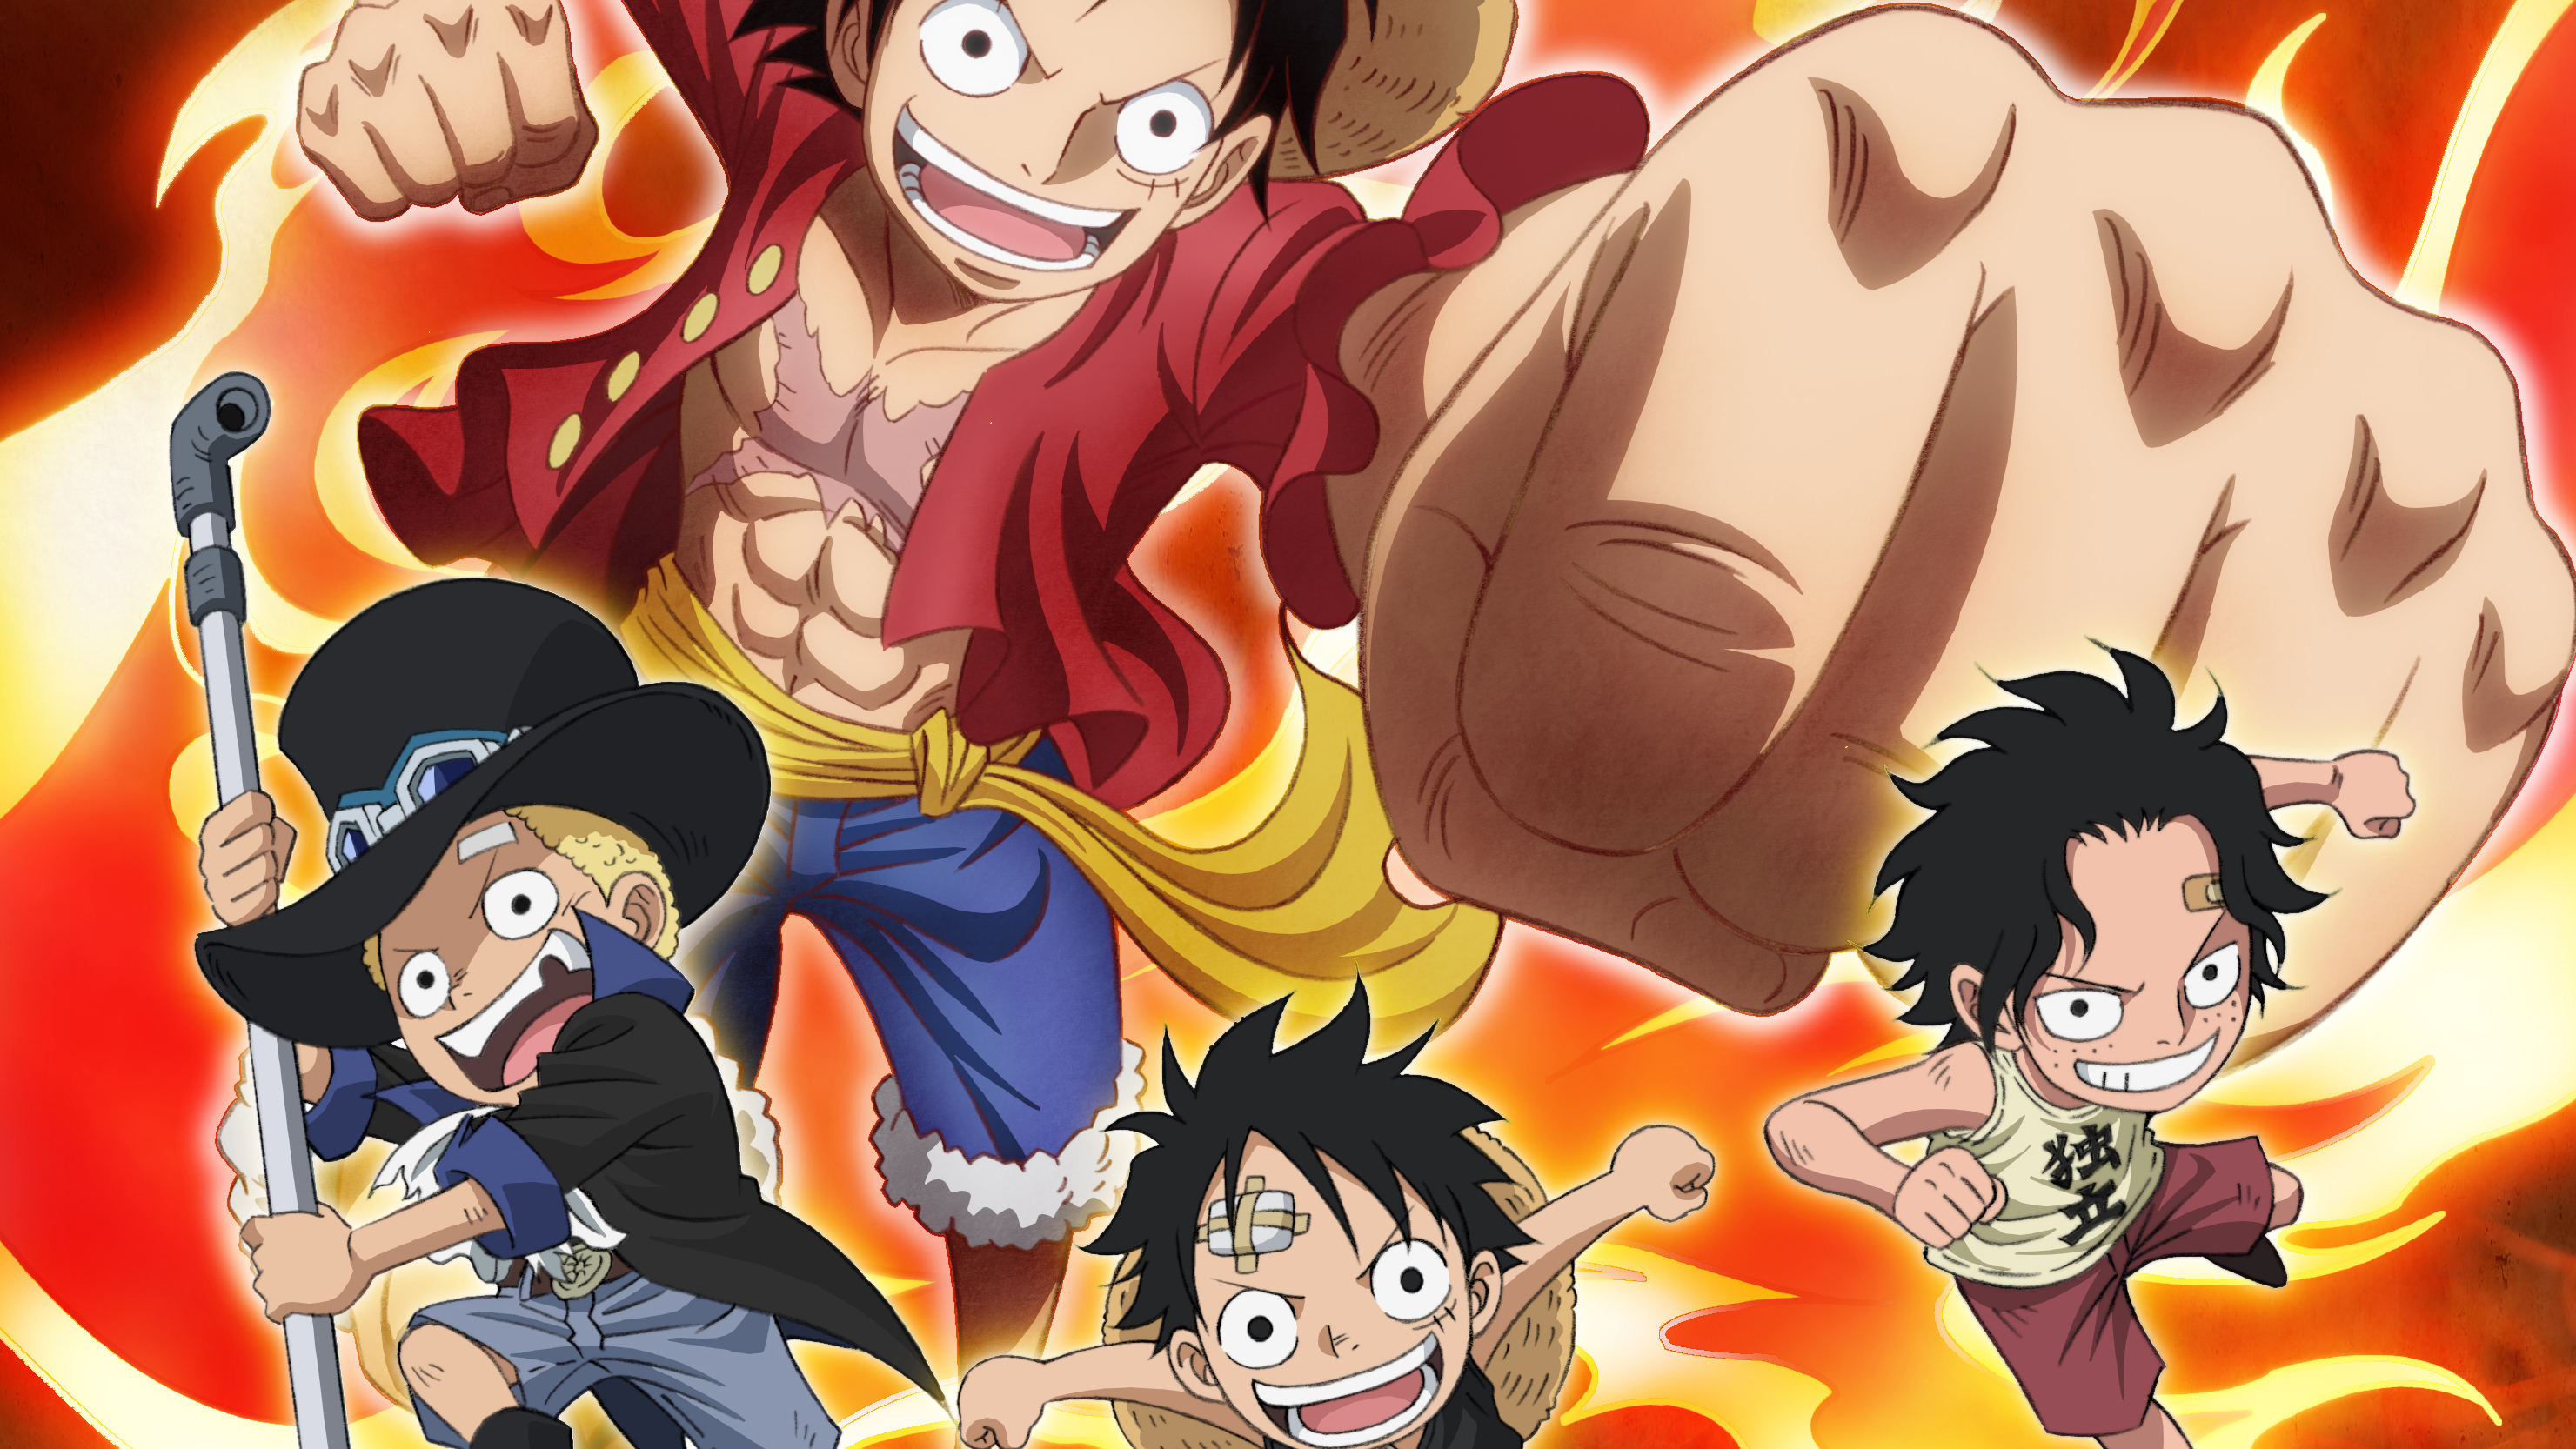 One Piece Special 9: Episode of Sabo: Bond of Three Brothers - A